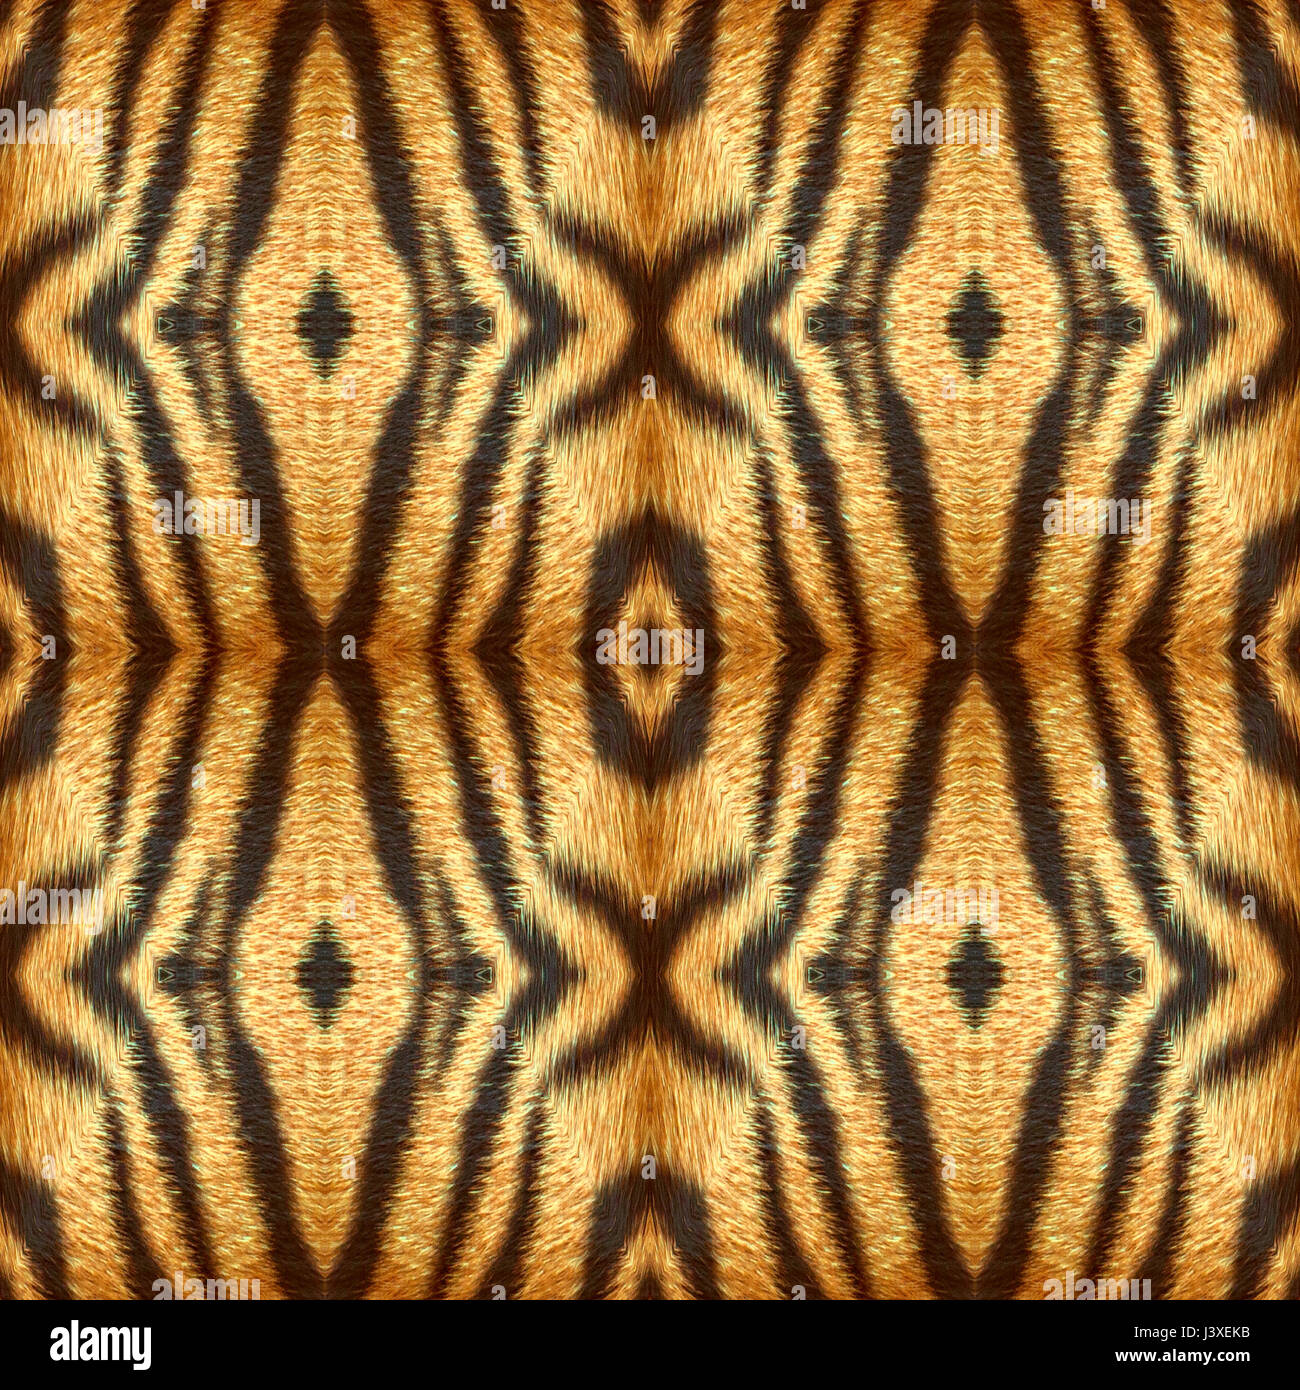 Tiger skin, seamless abstract pattern or background, natural pattern by mother nature. Stock Photo